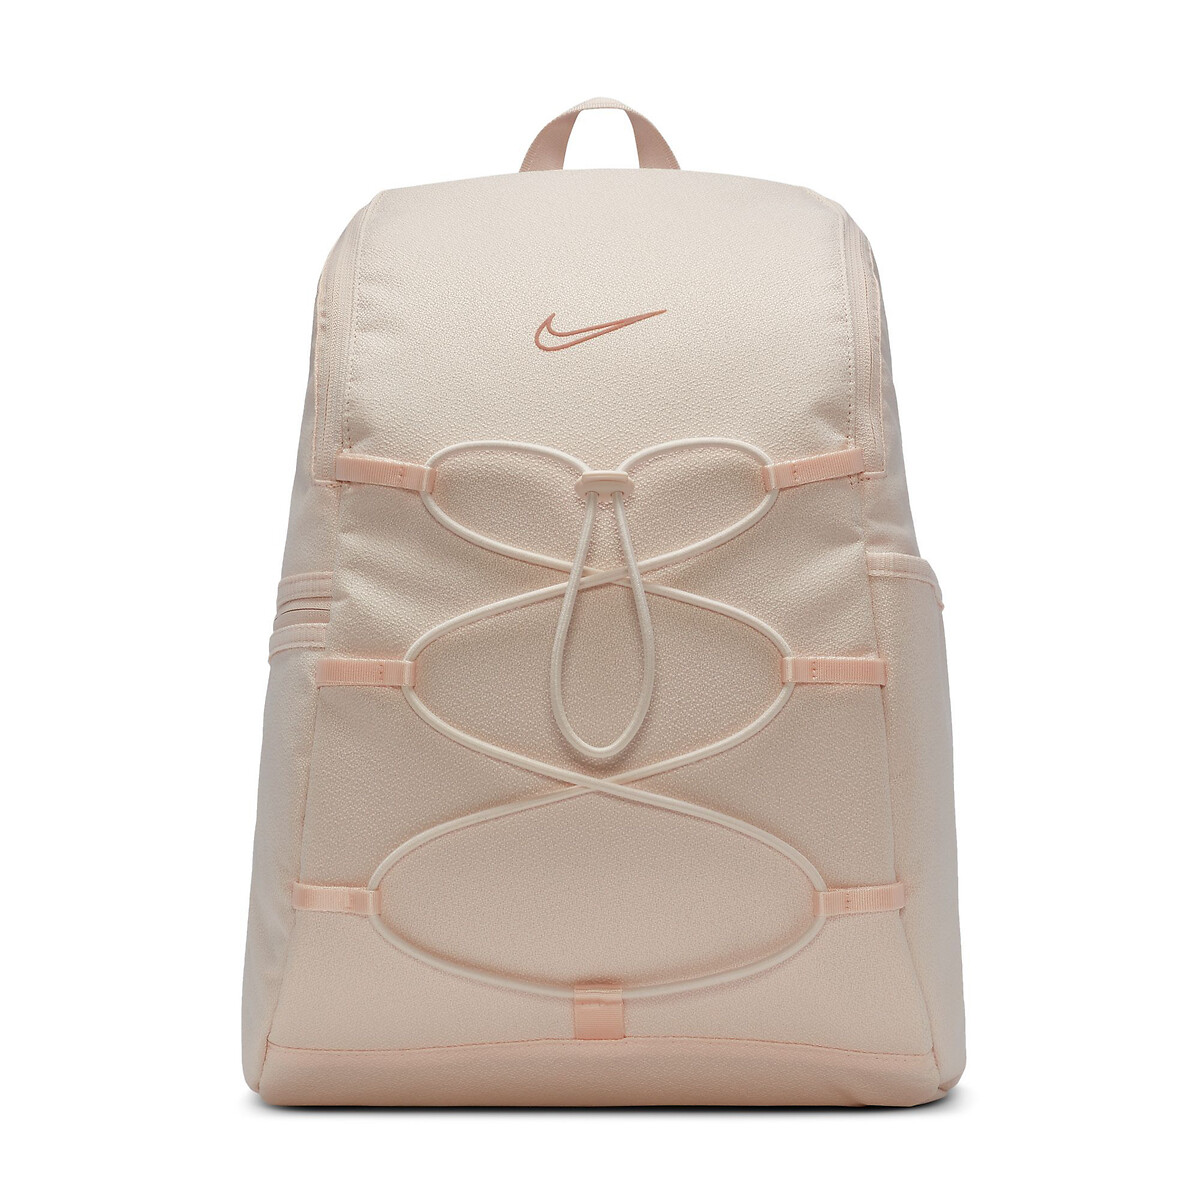 One backpack, light pink, Nike | La Redoute